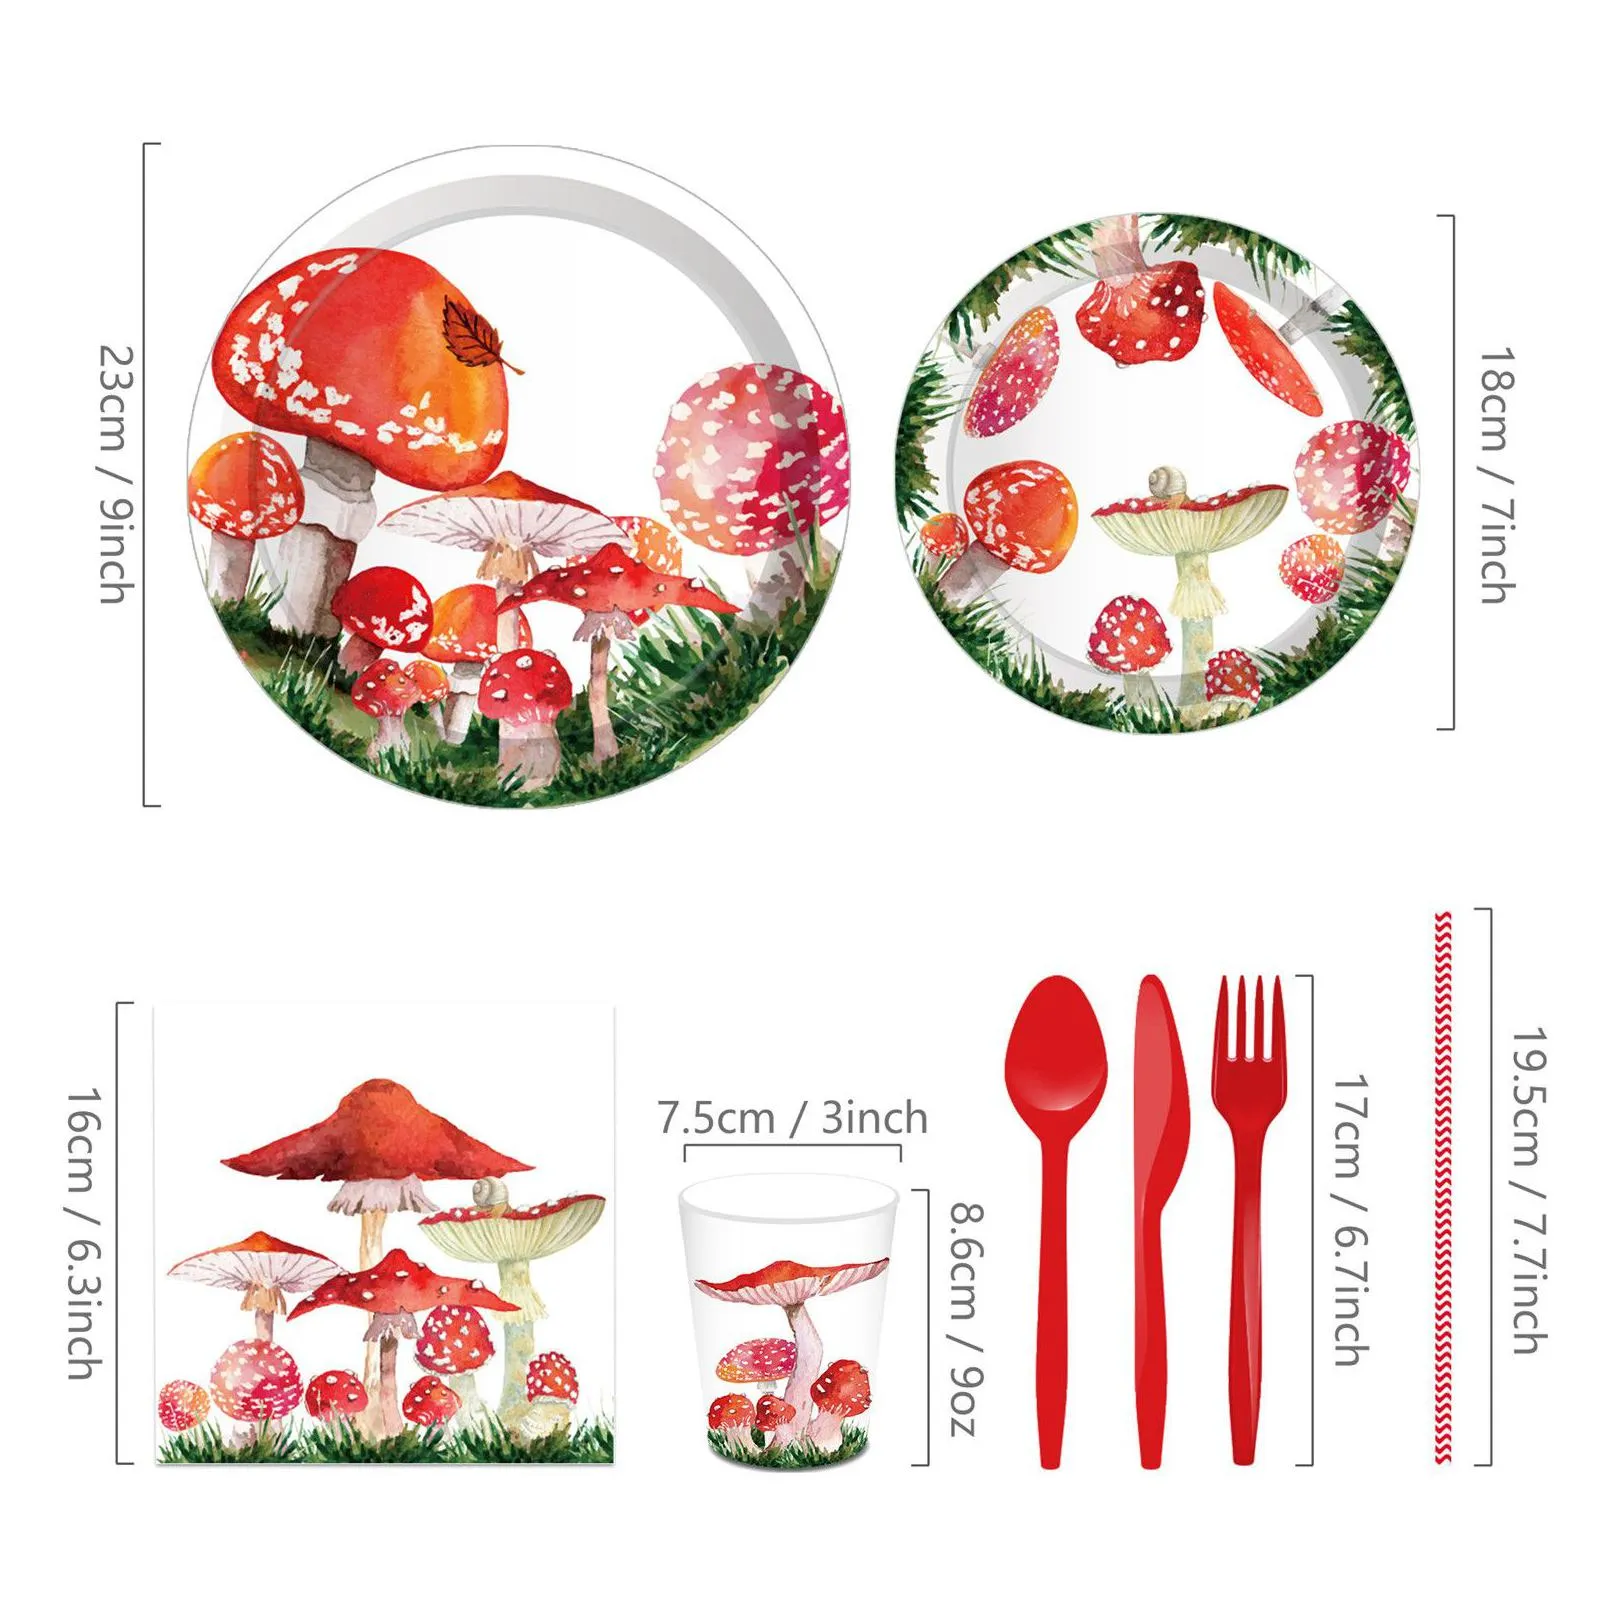 red watercolor mushroom paper plates party supplie plates and napkins birthday set party dinnerware serves 8 guests for plates, napkins, cups